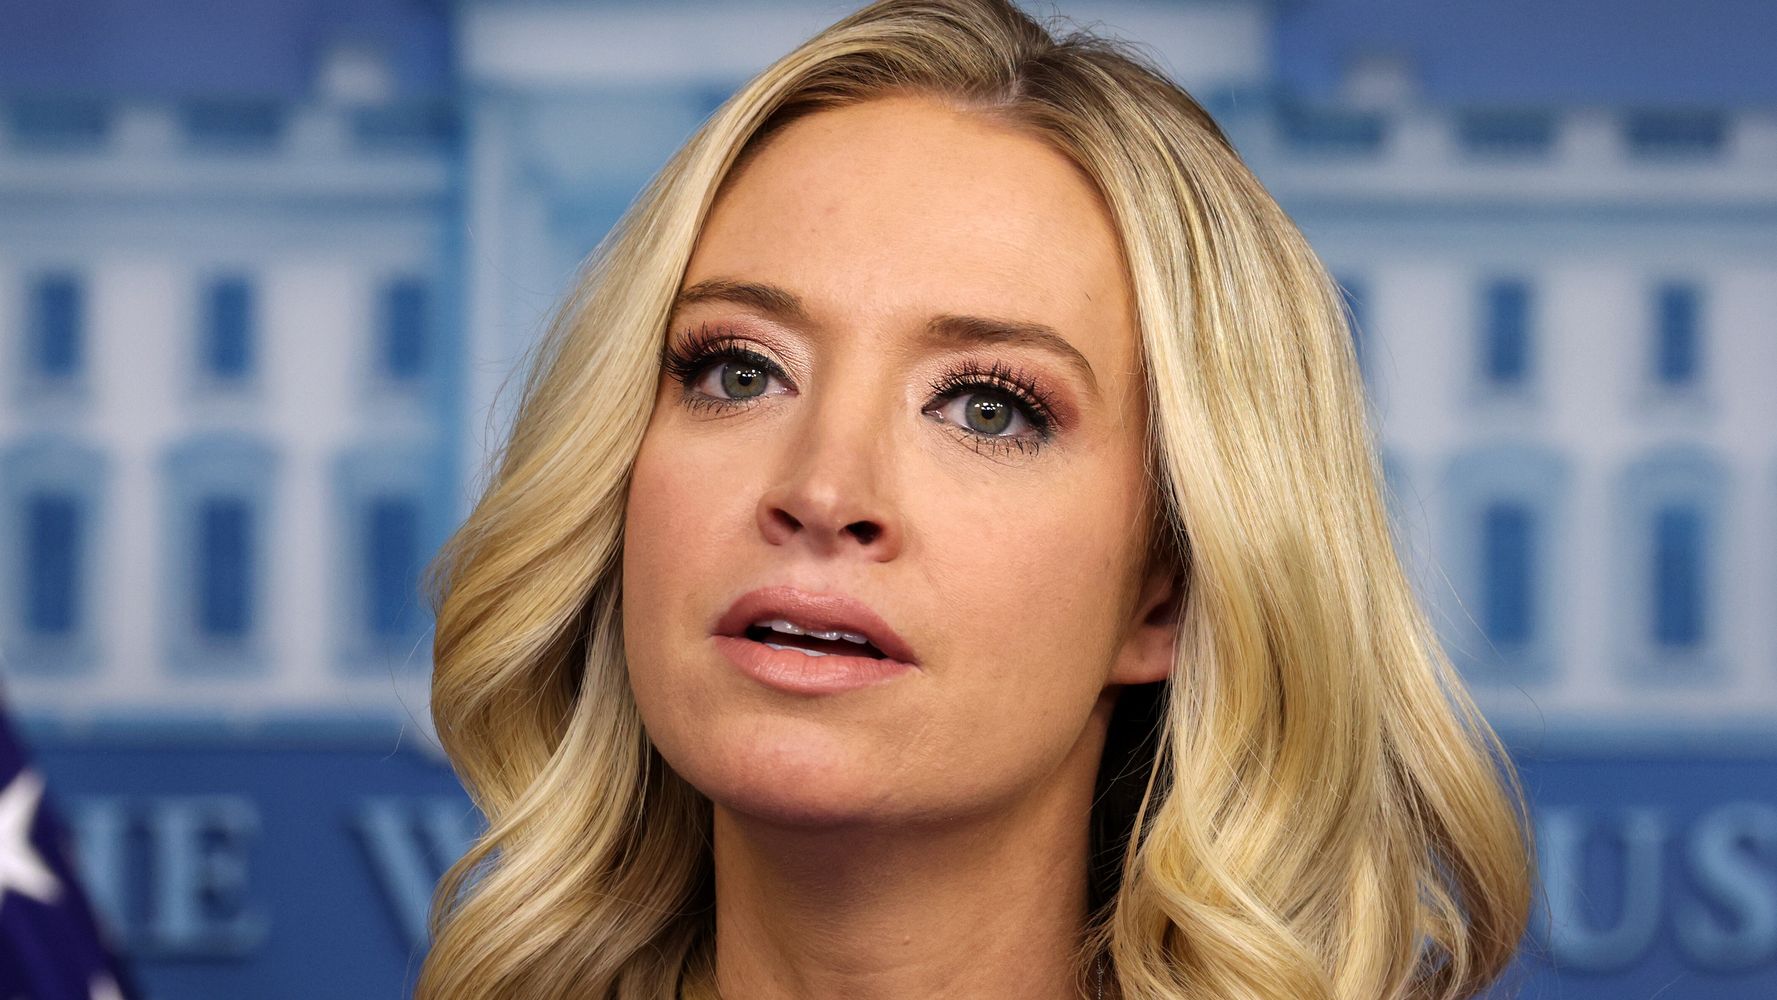 Twitter Users Throw The Book At Kayleigh McEnany Over White House Memoir